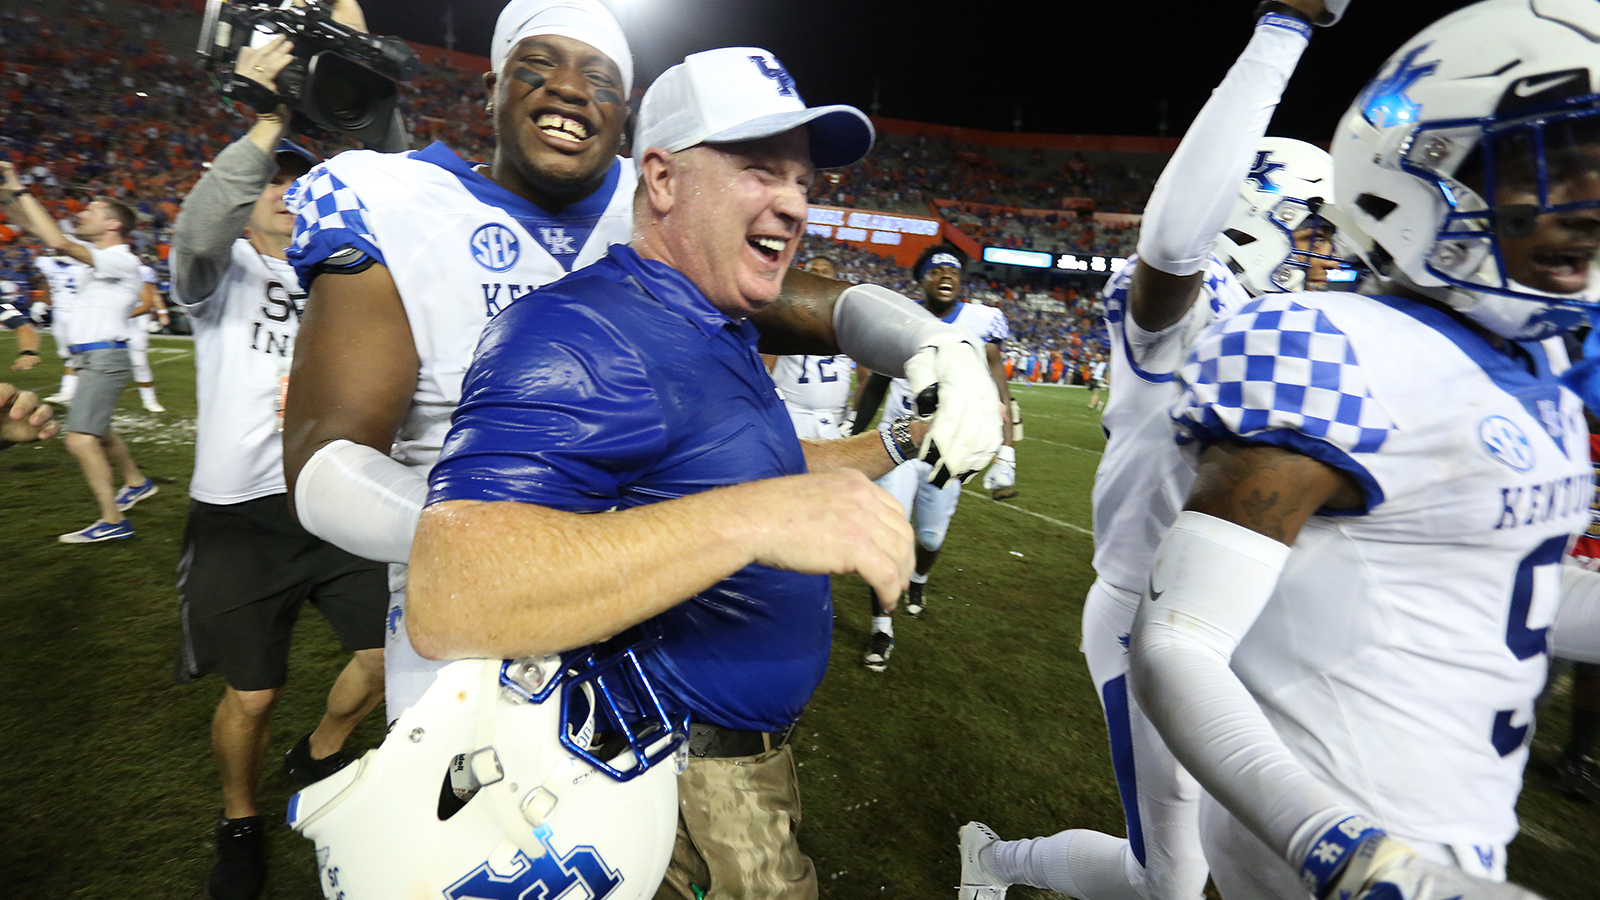 Stoops, Cats Preparing for Challenge of Florida